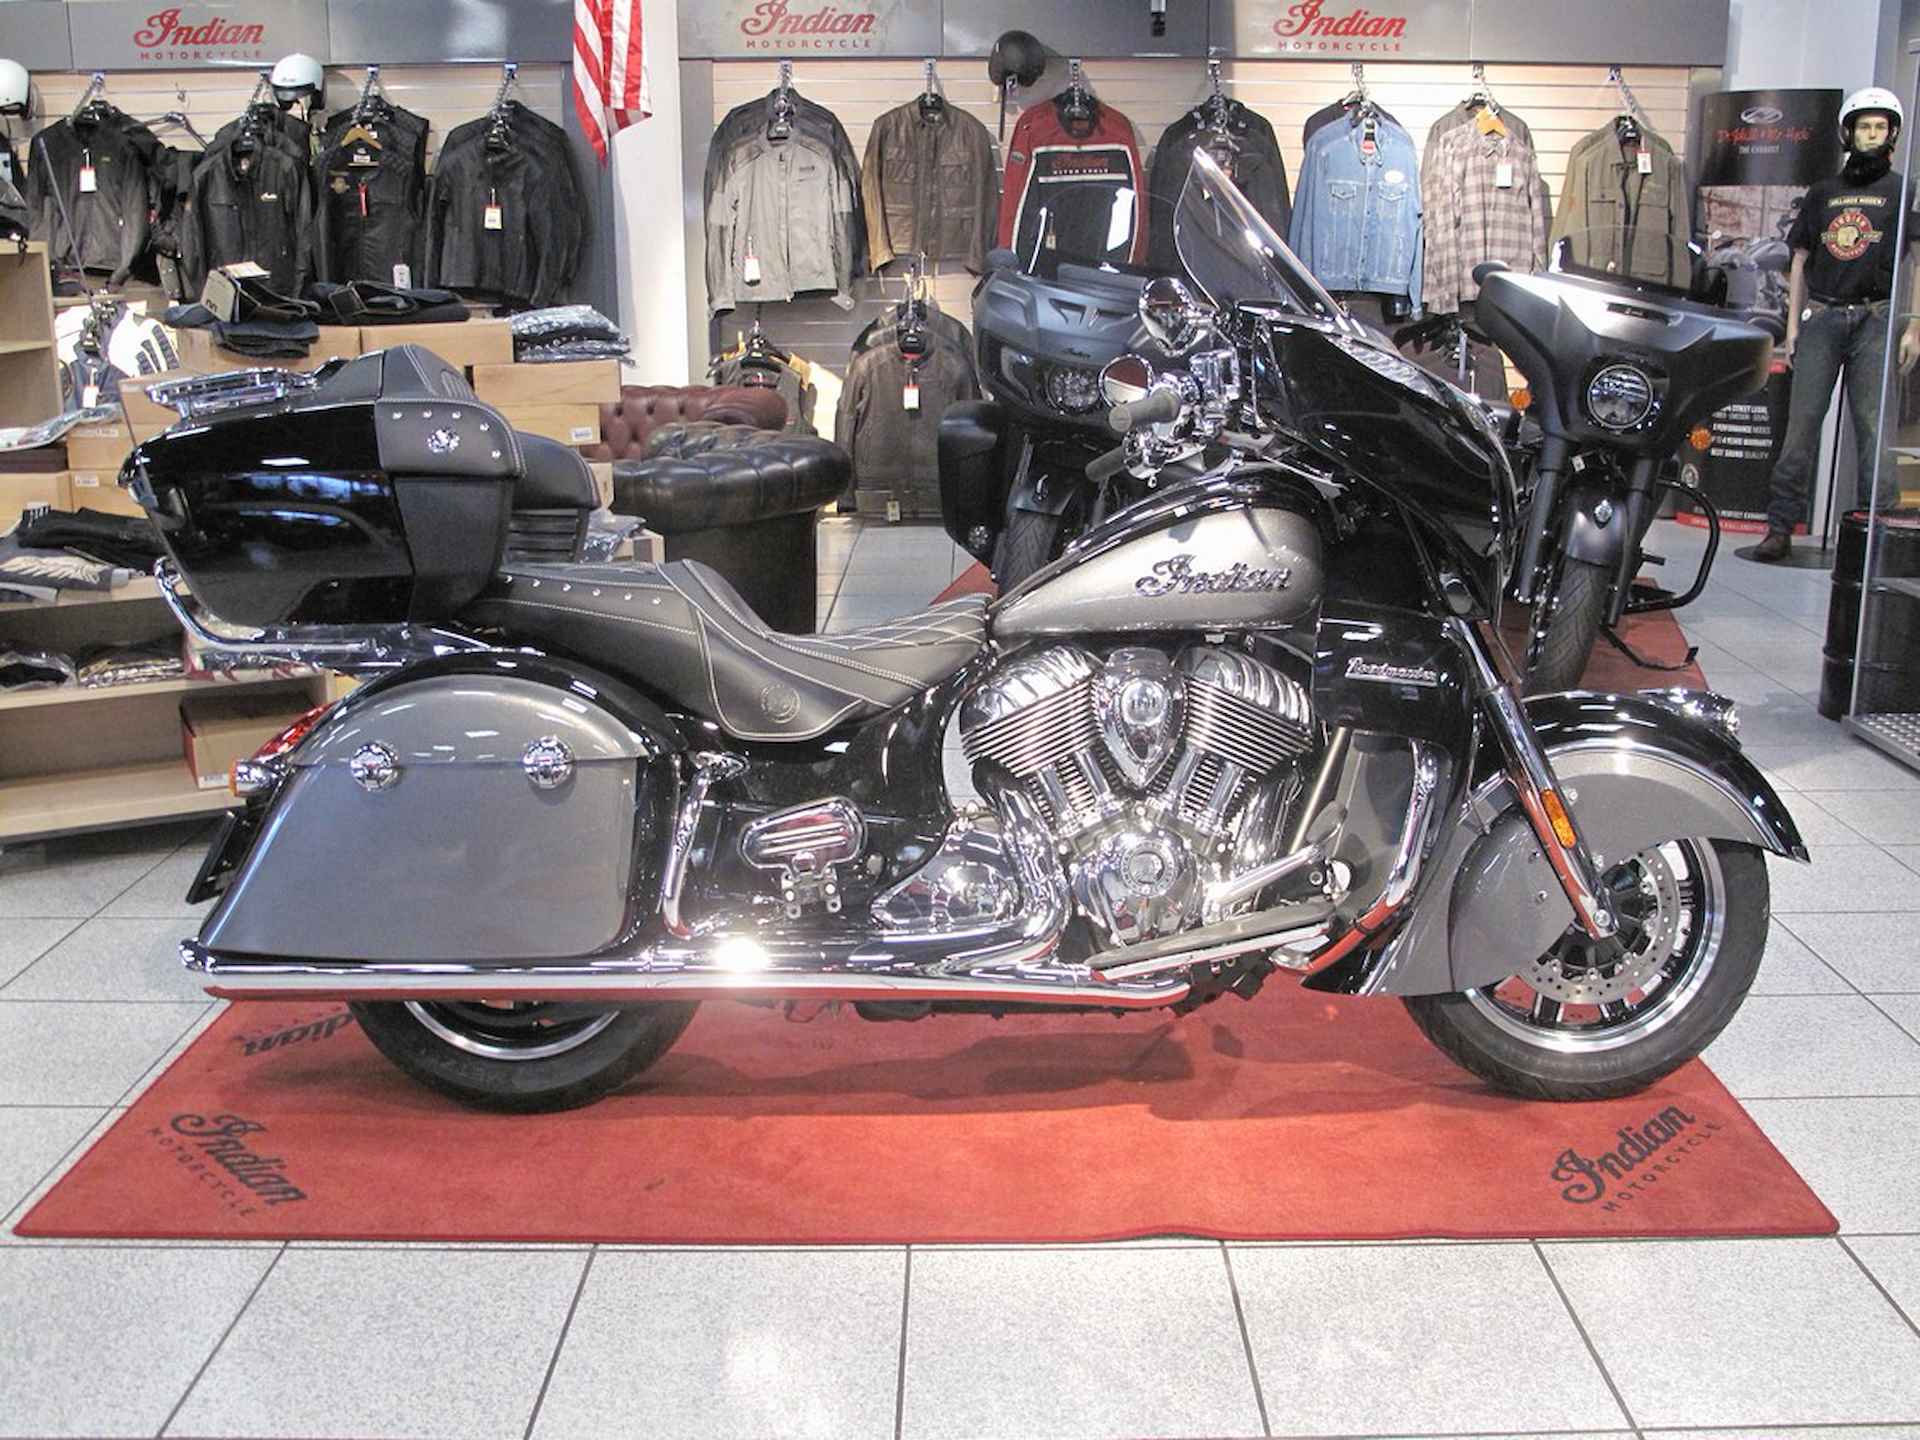 Indian Roadmaster Official Indian Motorcycle Dealer - 1/13